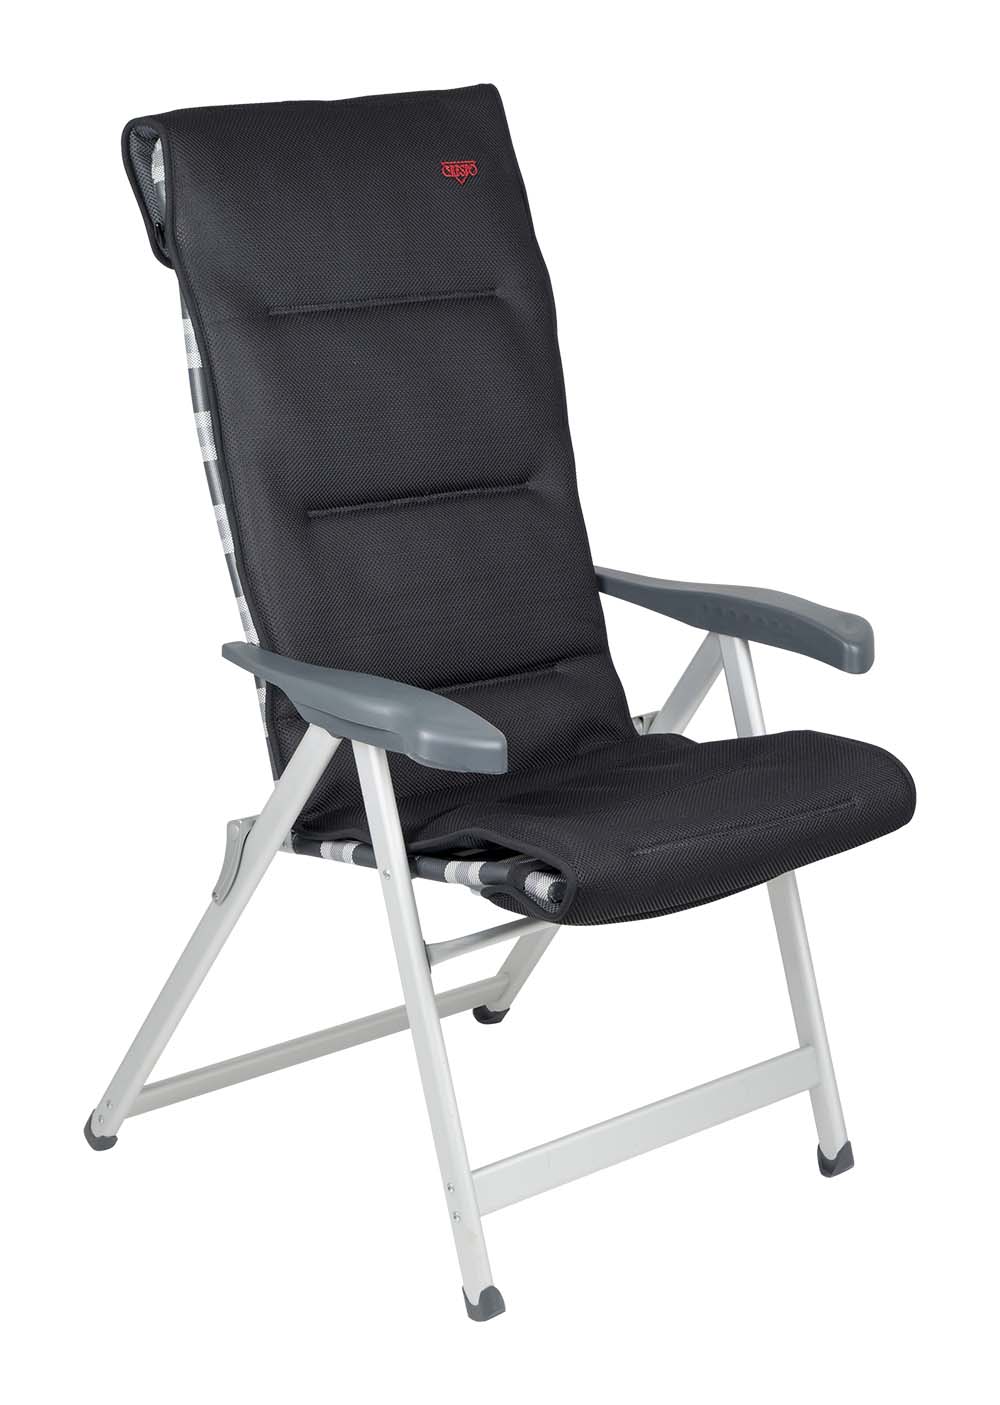 1149282 A luxury chair cover for extra comfort with every folding chair. This chair cover has a different colour on the fore and rear sides. This means that the cover can be used both ways round.   Offers extra comfort though its padded 3D material. The comfortable padding of this material allows for extra air circulation.  The chair cover can be used on any chair using the eyelet and loop construction.